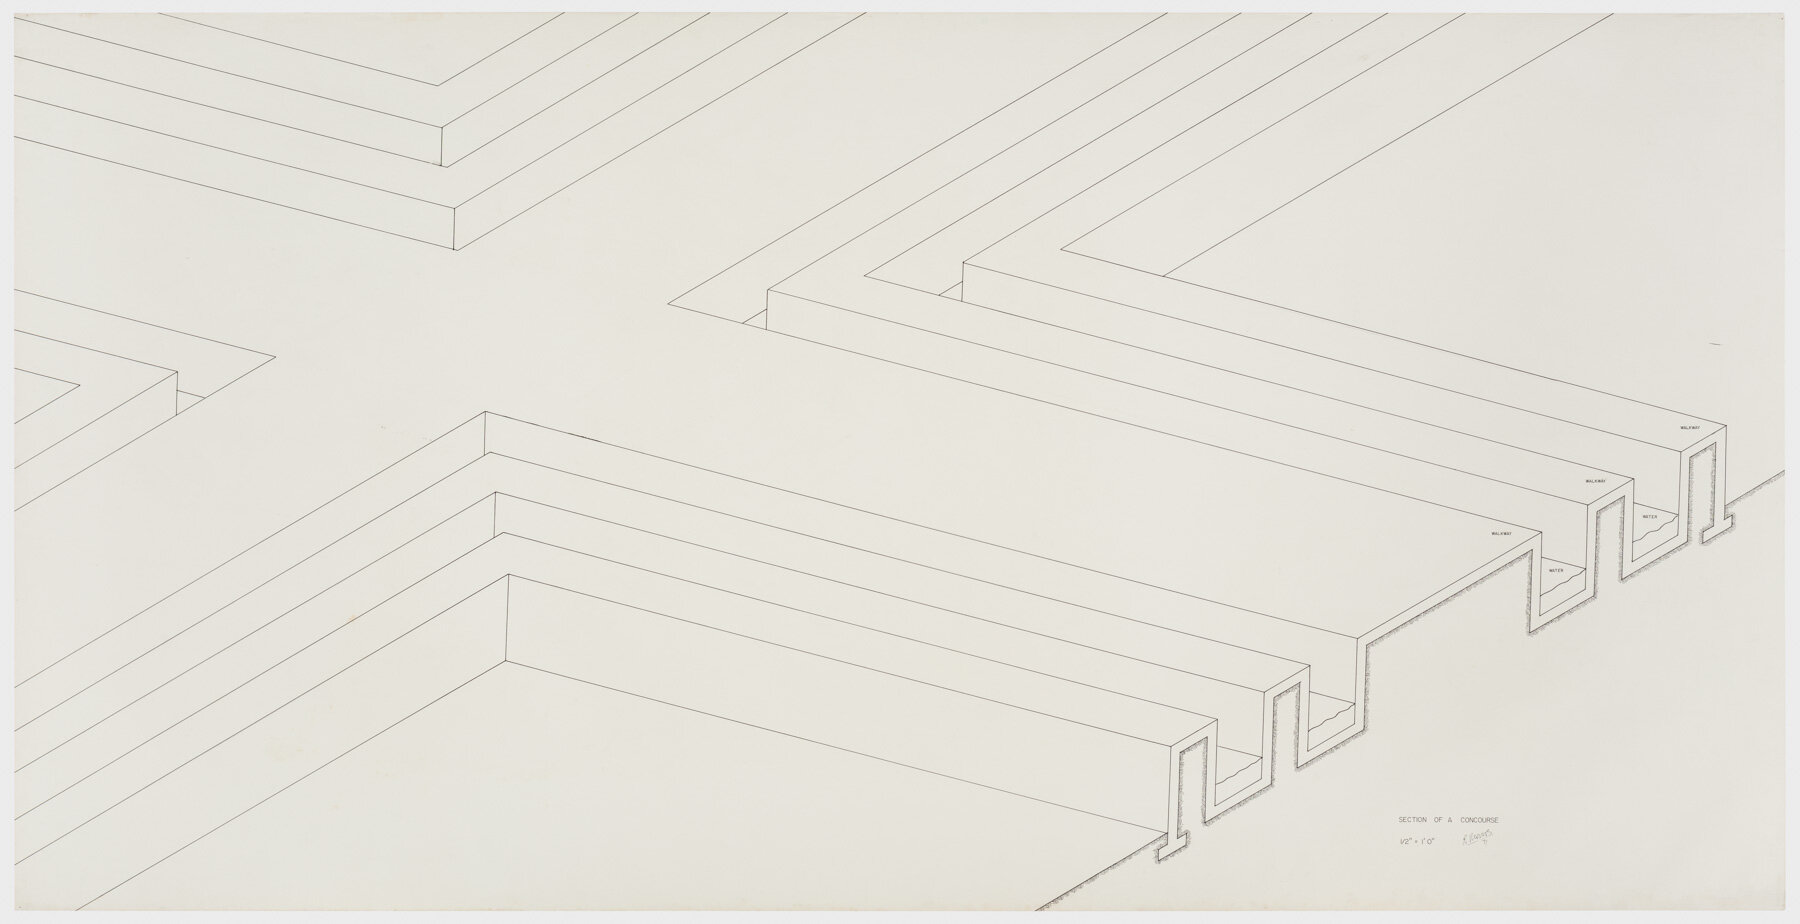  Robert Morris. Section of a Concourse, 1971. Ink on paper, 42 x 83 in. (107 x 211 cm). Estate of Robert Morris, courtesy Castelli Gallery, New York. © 2019 The Estate of Robert Morris / Artists Rights Society (ARS), New York. Photo: Stan Narten 